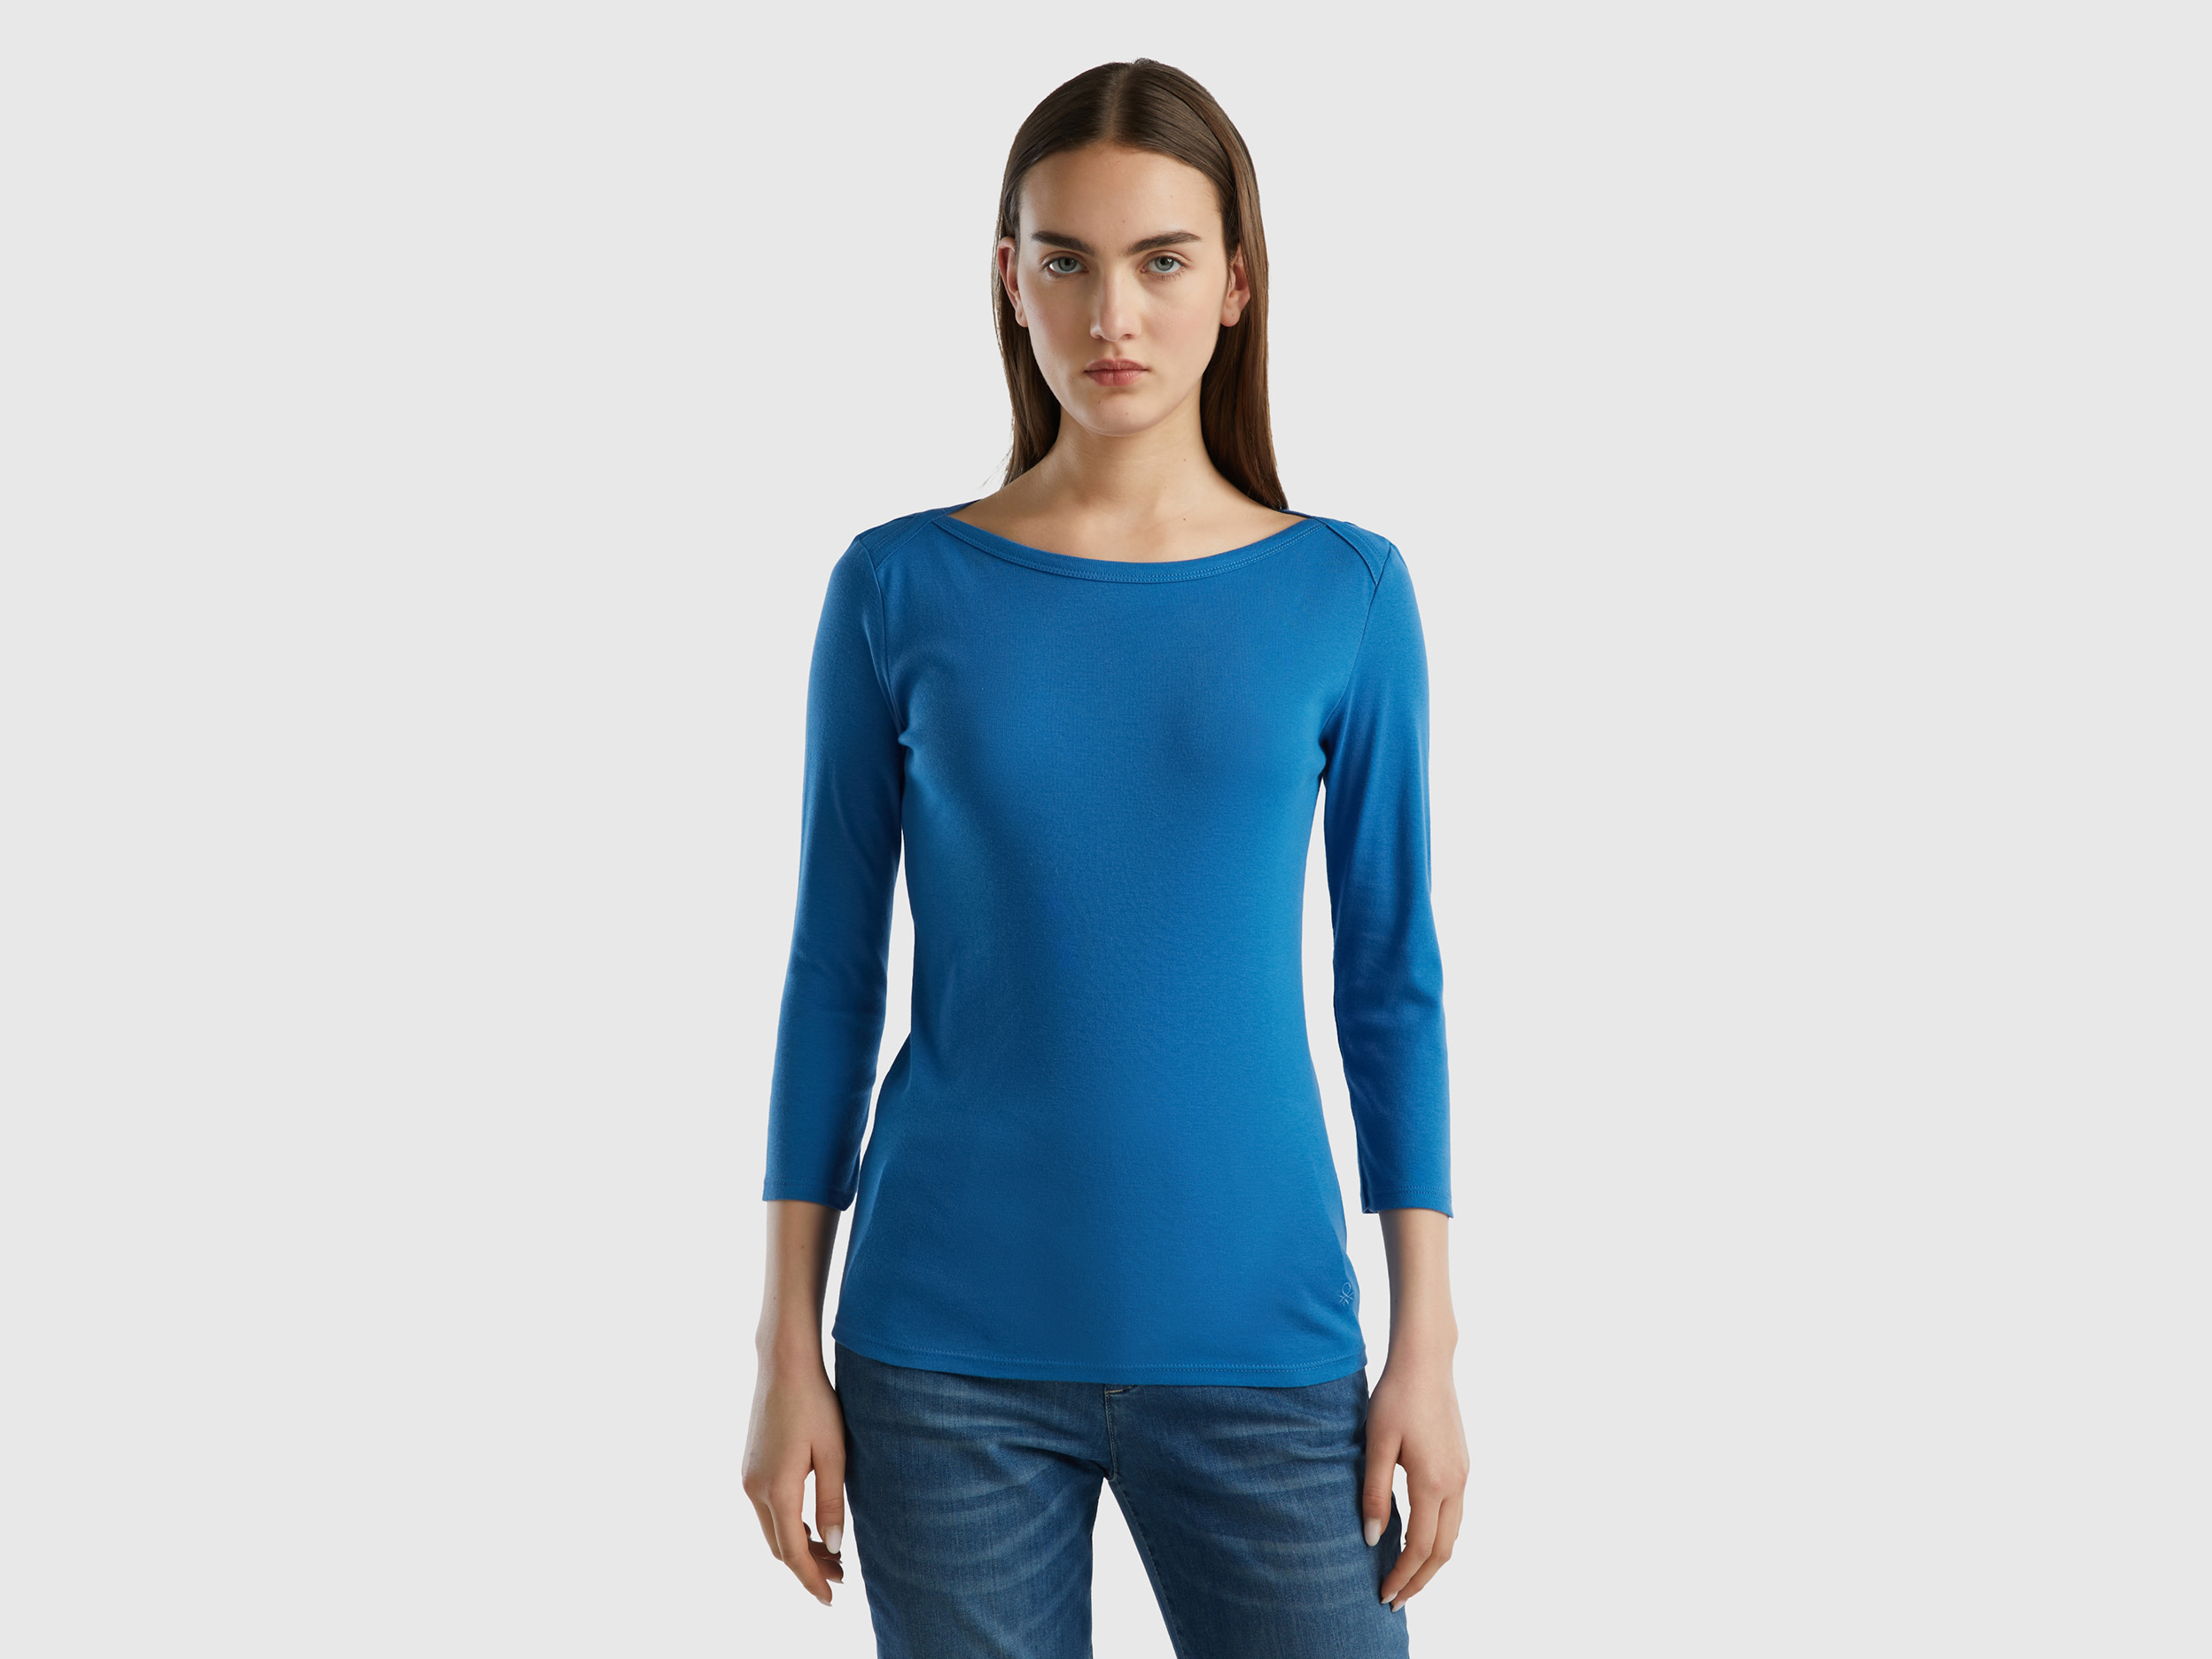 Benetton, T-shirt With Boat Neck In 100% Cotton, size S, Blue, Women